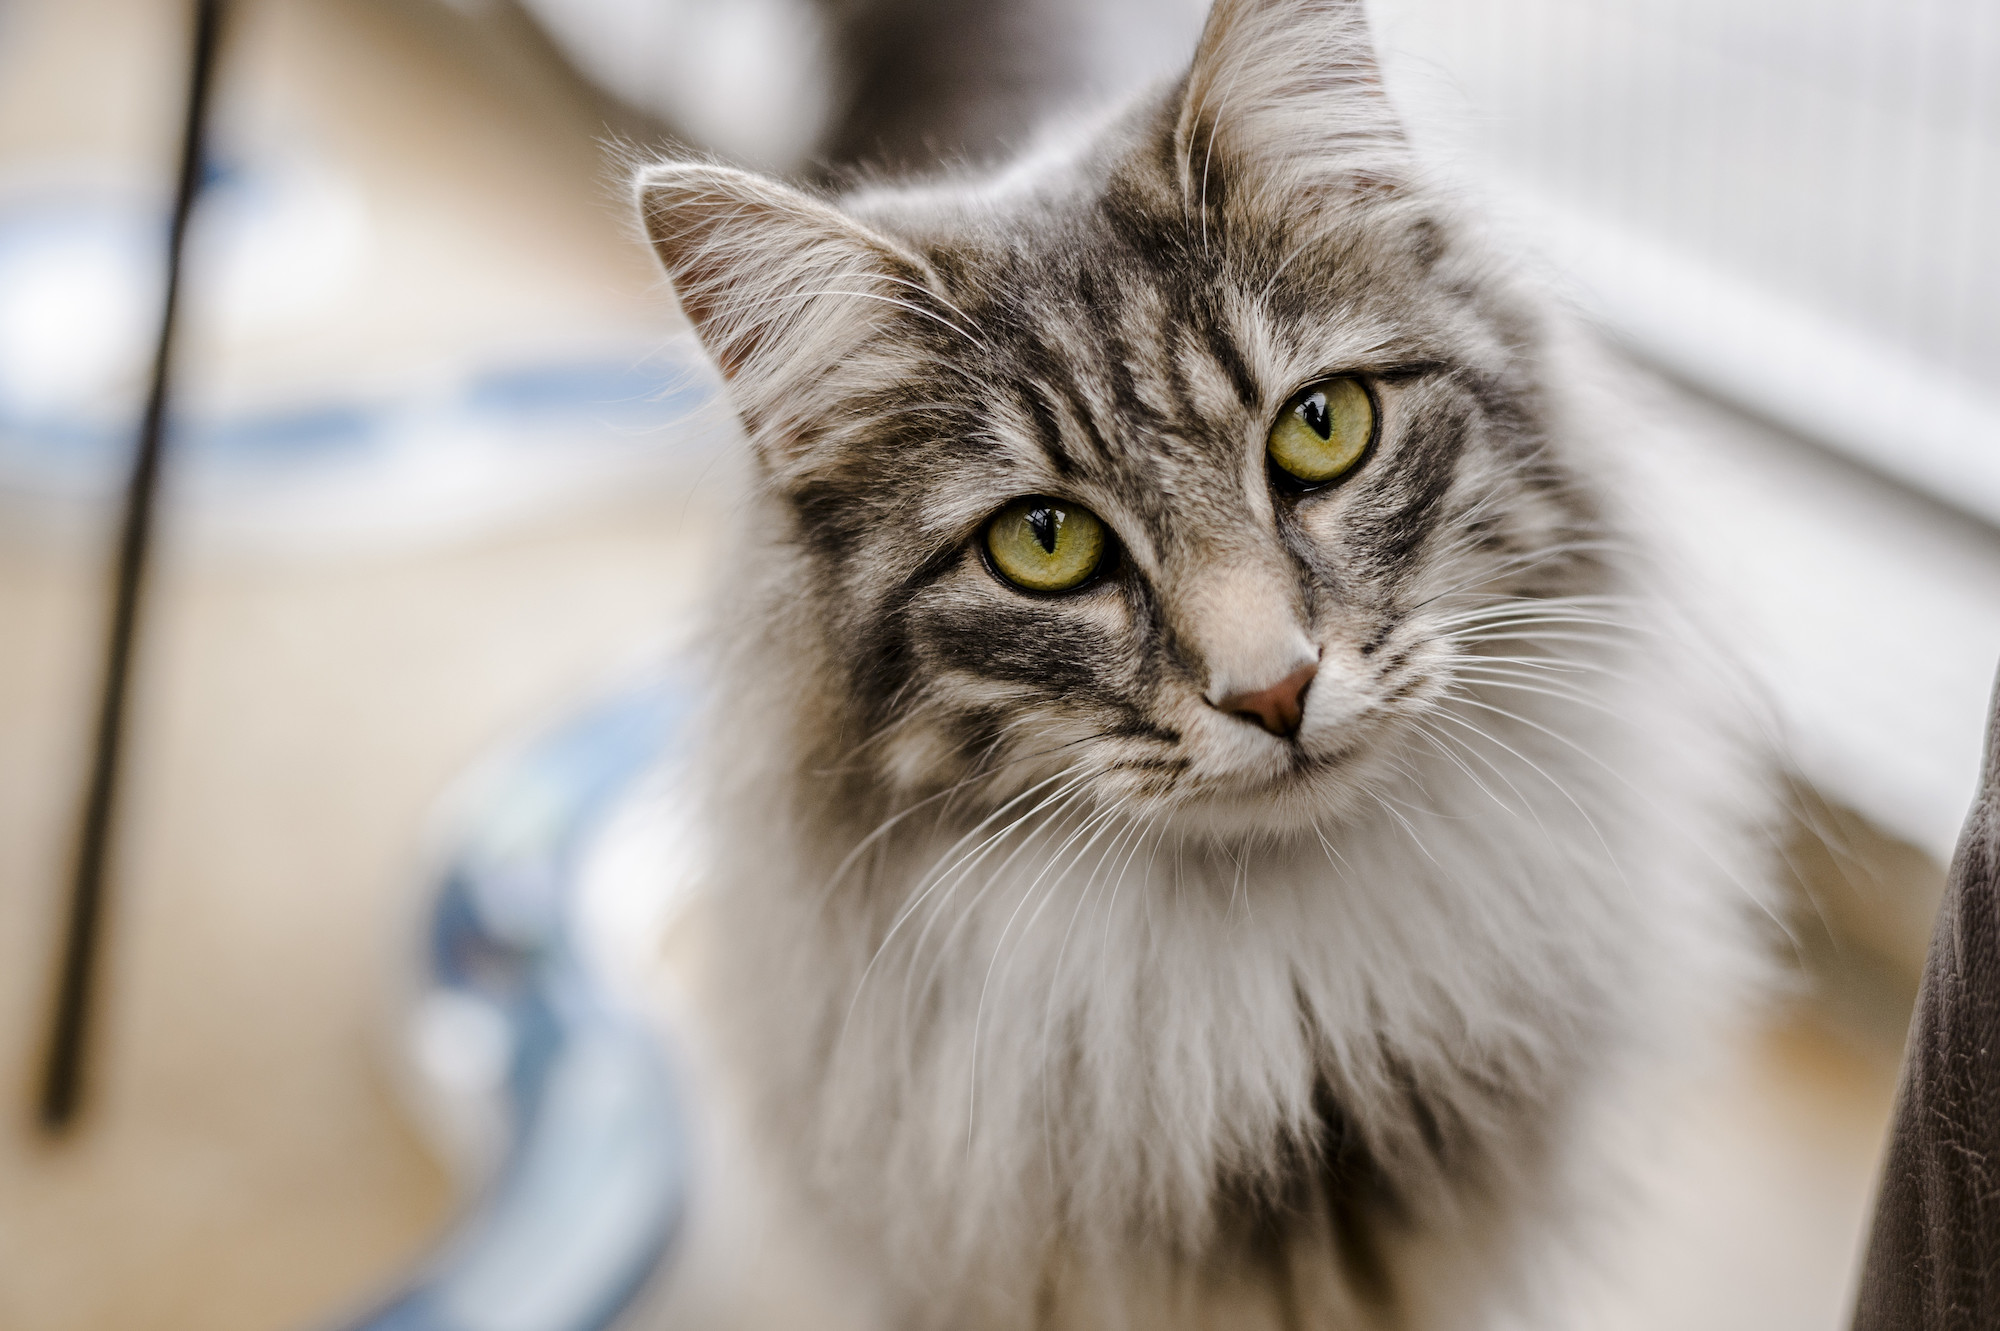 The Best Shampoos And Tips on How To Bath Your Cat